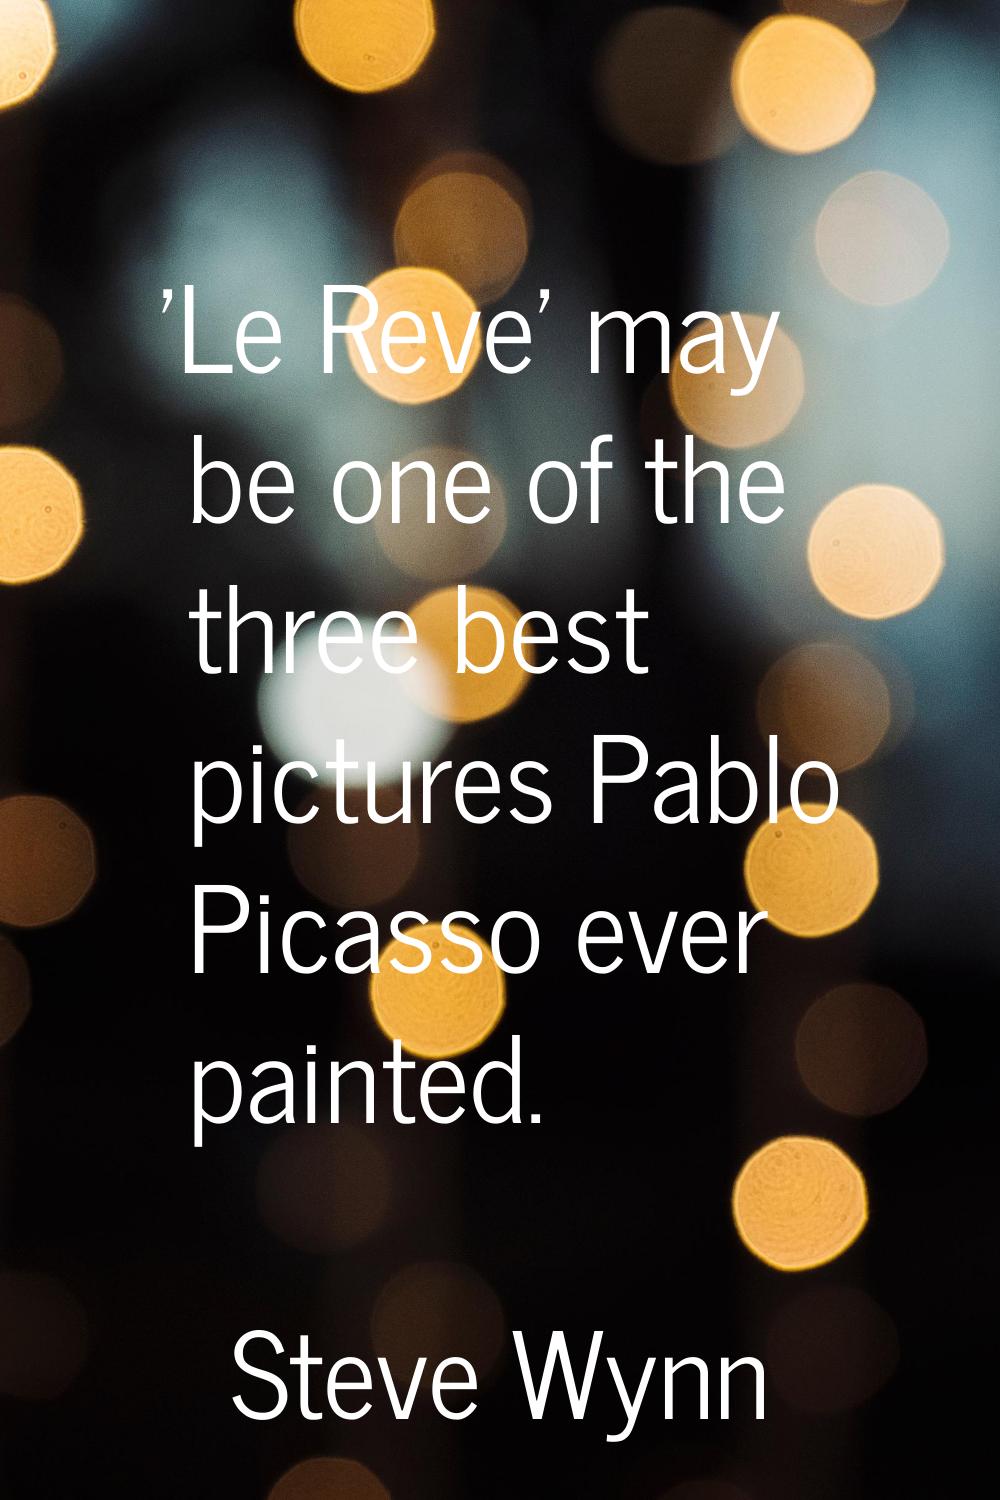 'Le Reve' may be one of the three best pictures Pablo Picasso ever painted.